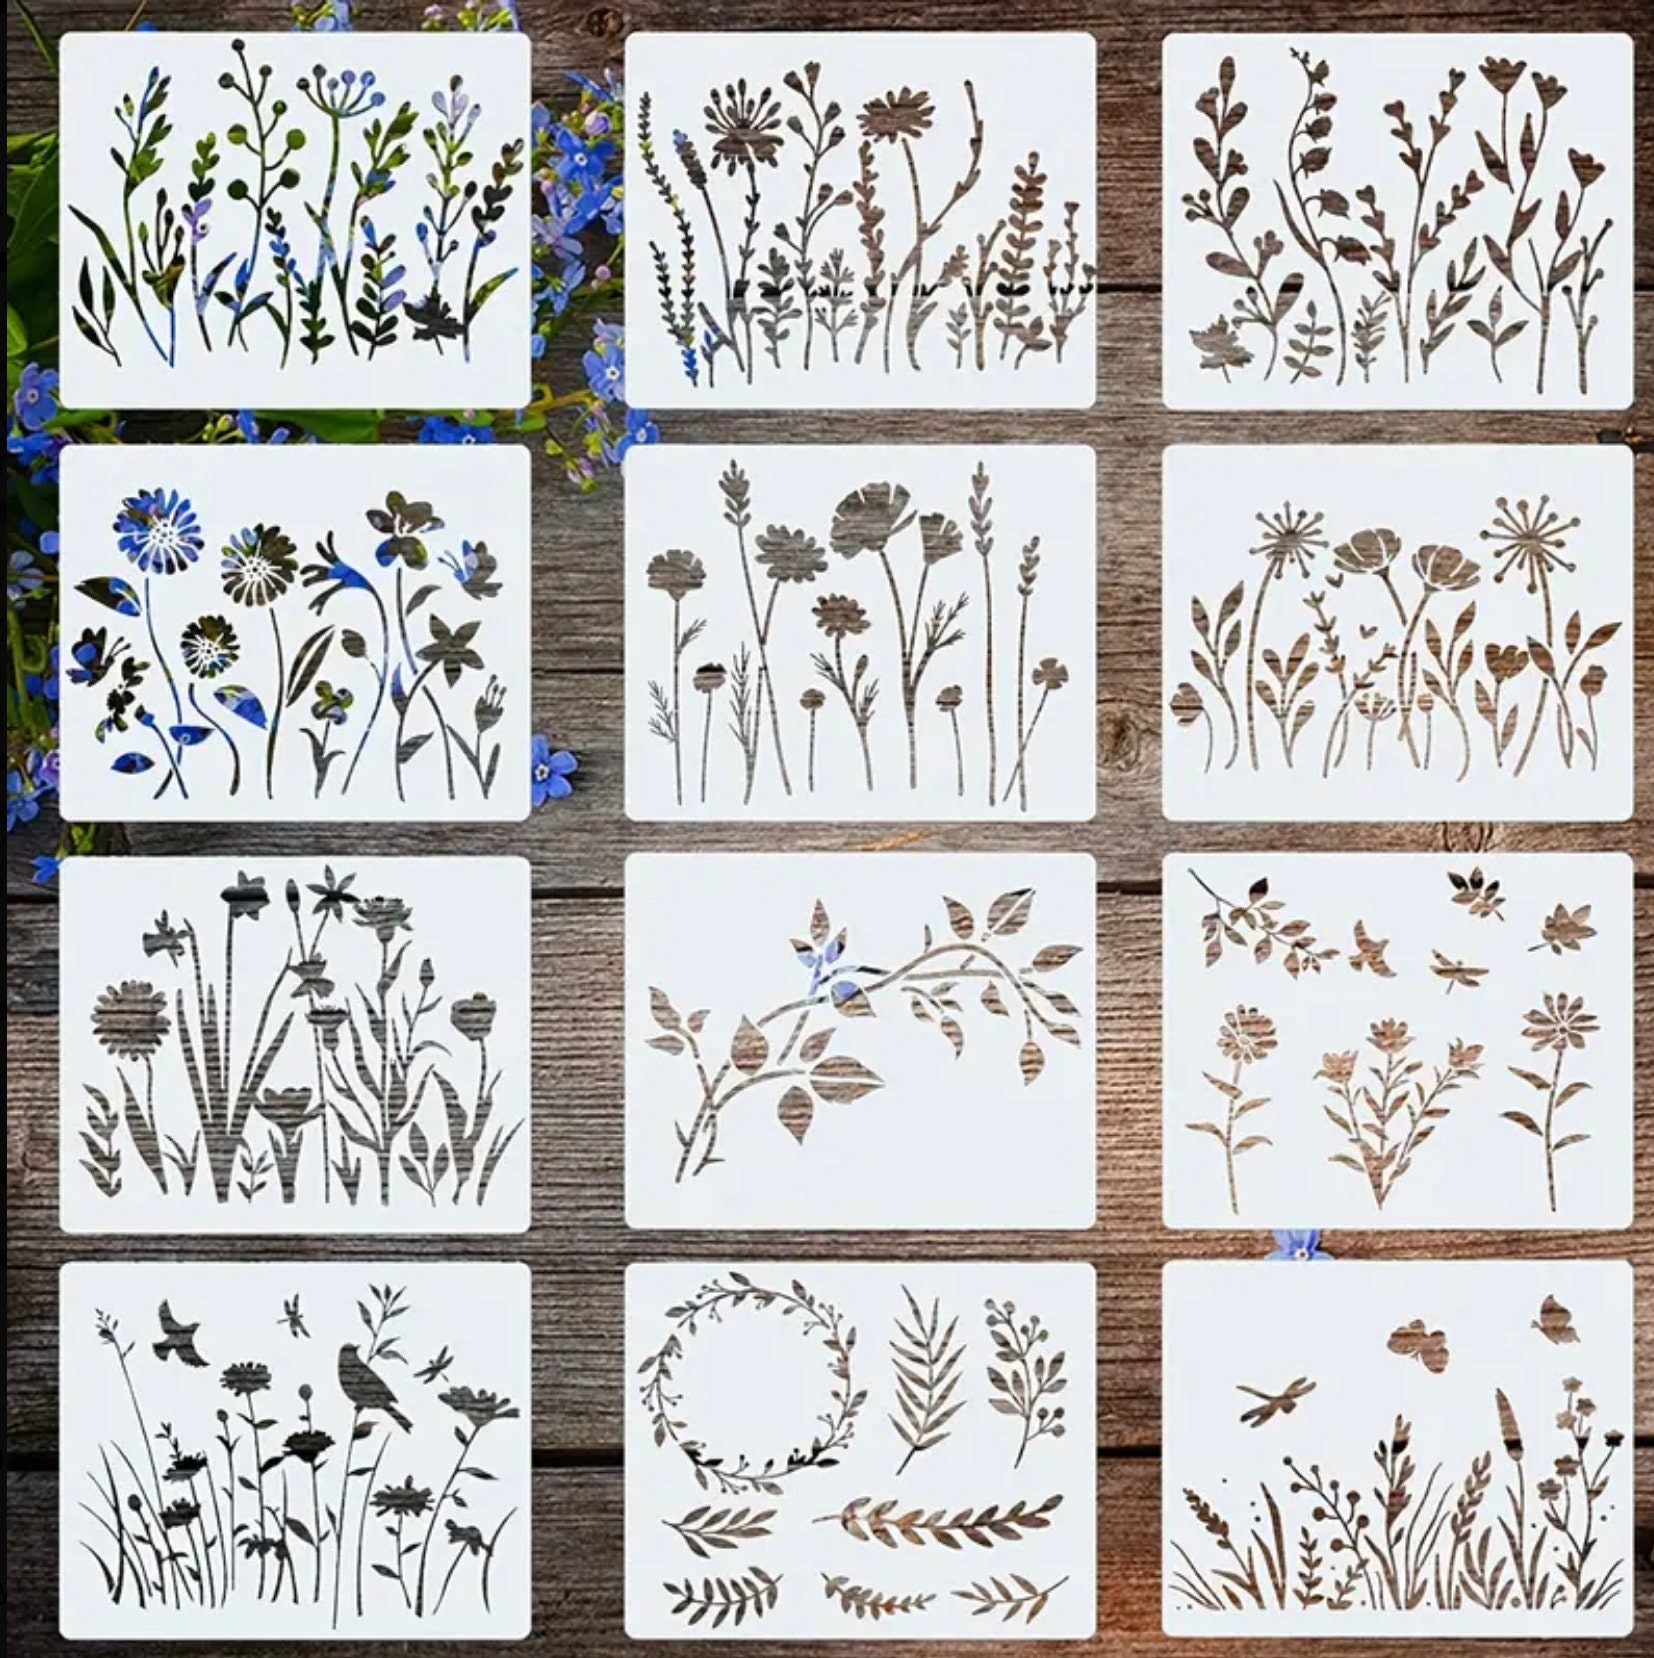 Flower Stencils for Painting on Wood, Canvas, Paper, Fabric, Floor